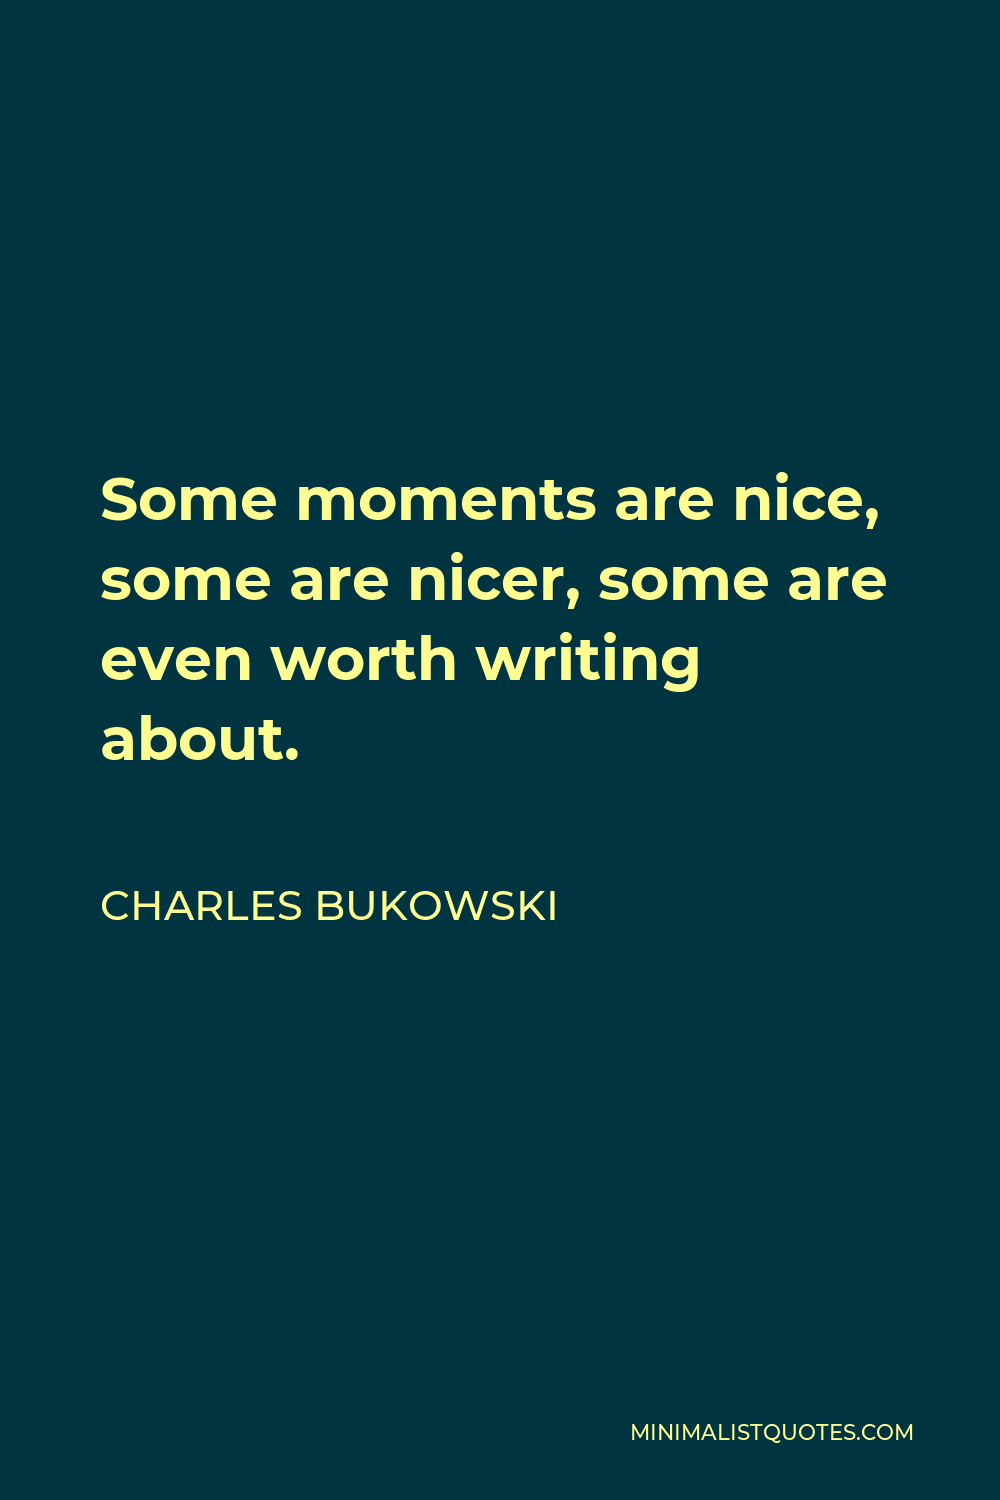 Charles Bukowski Quote - Some moments are nice, some are nicer, some are even worth writing about.